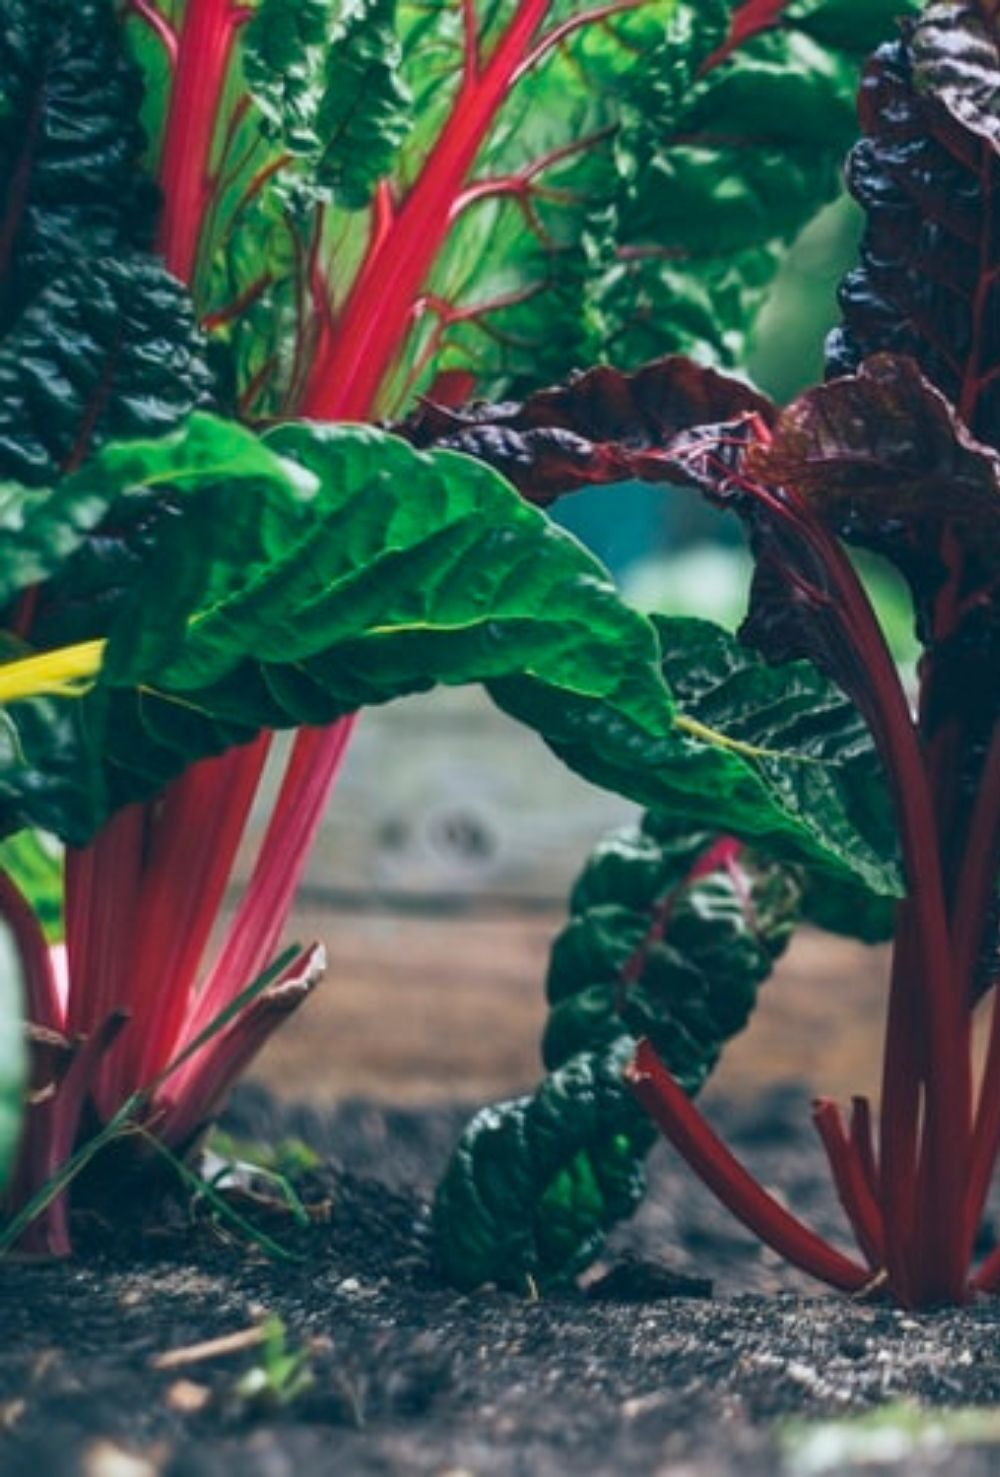 Image of chard stalks in a garden bed